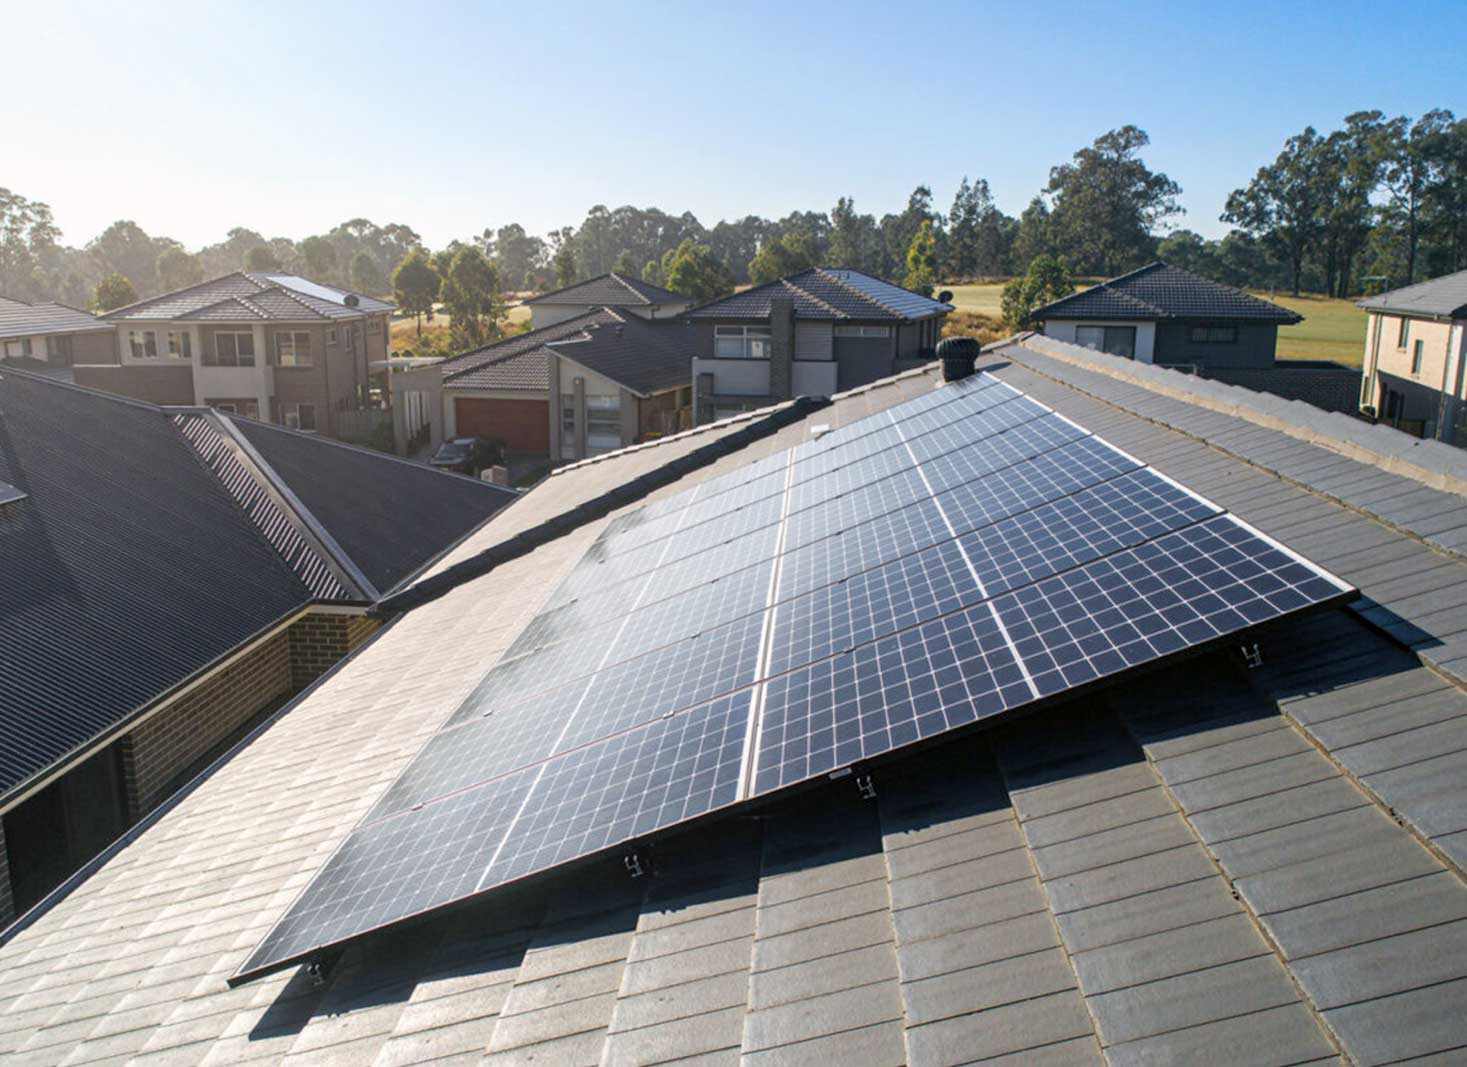 A picture of a rooftop solar panel installation in Australia